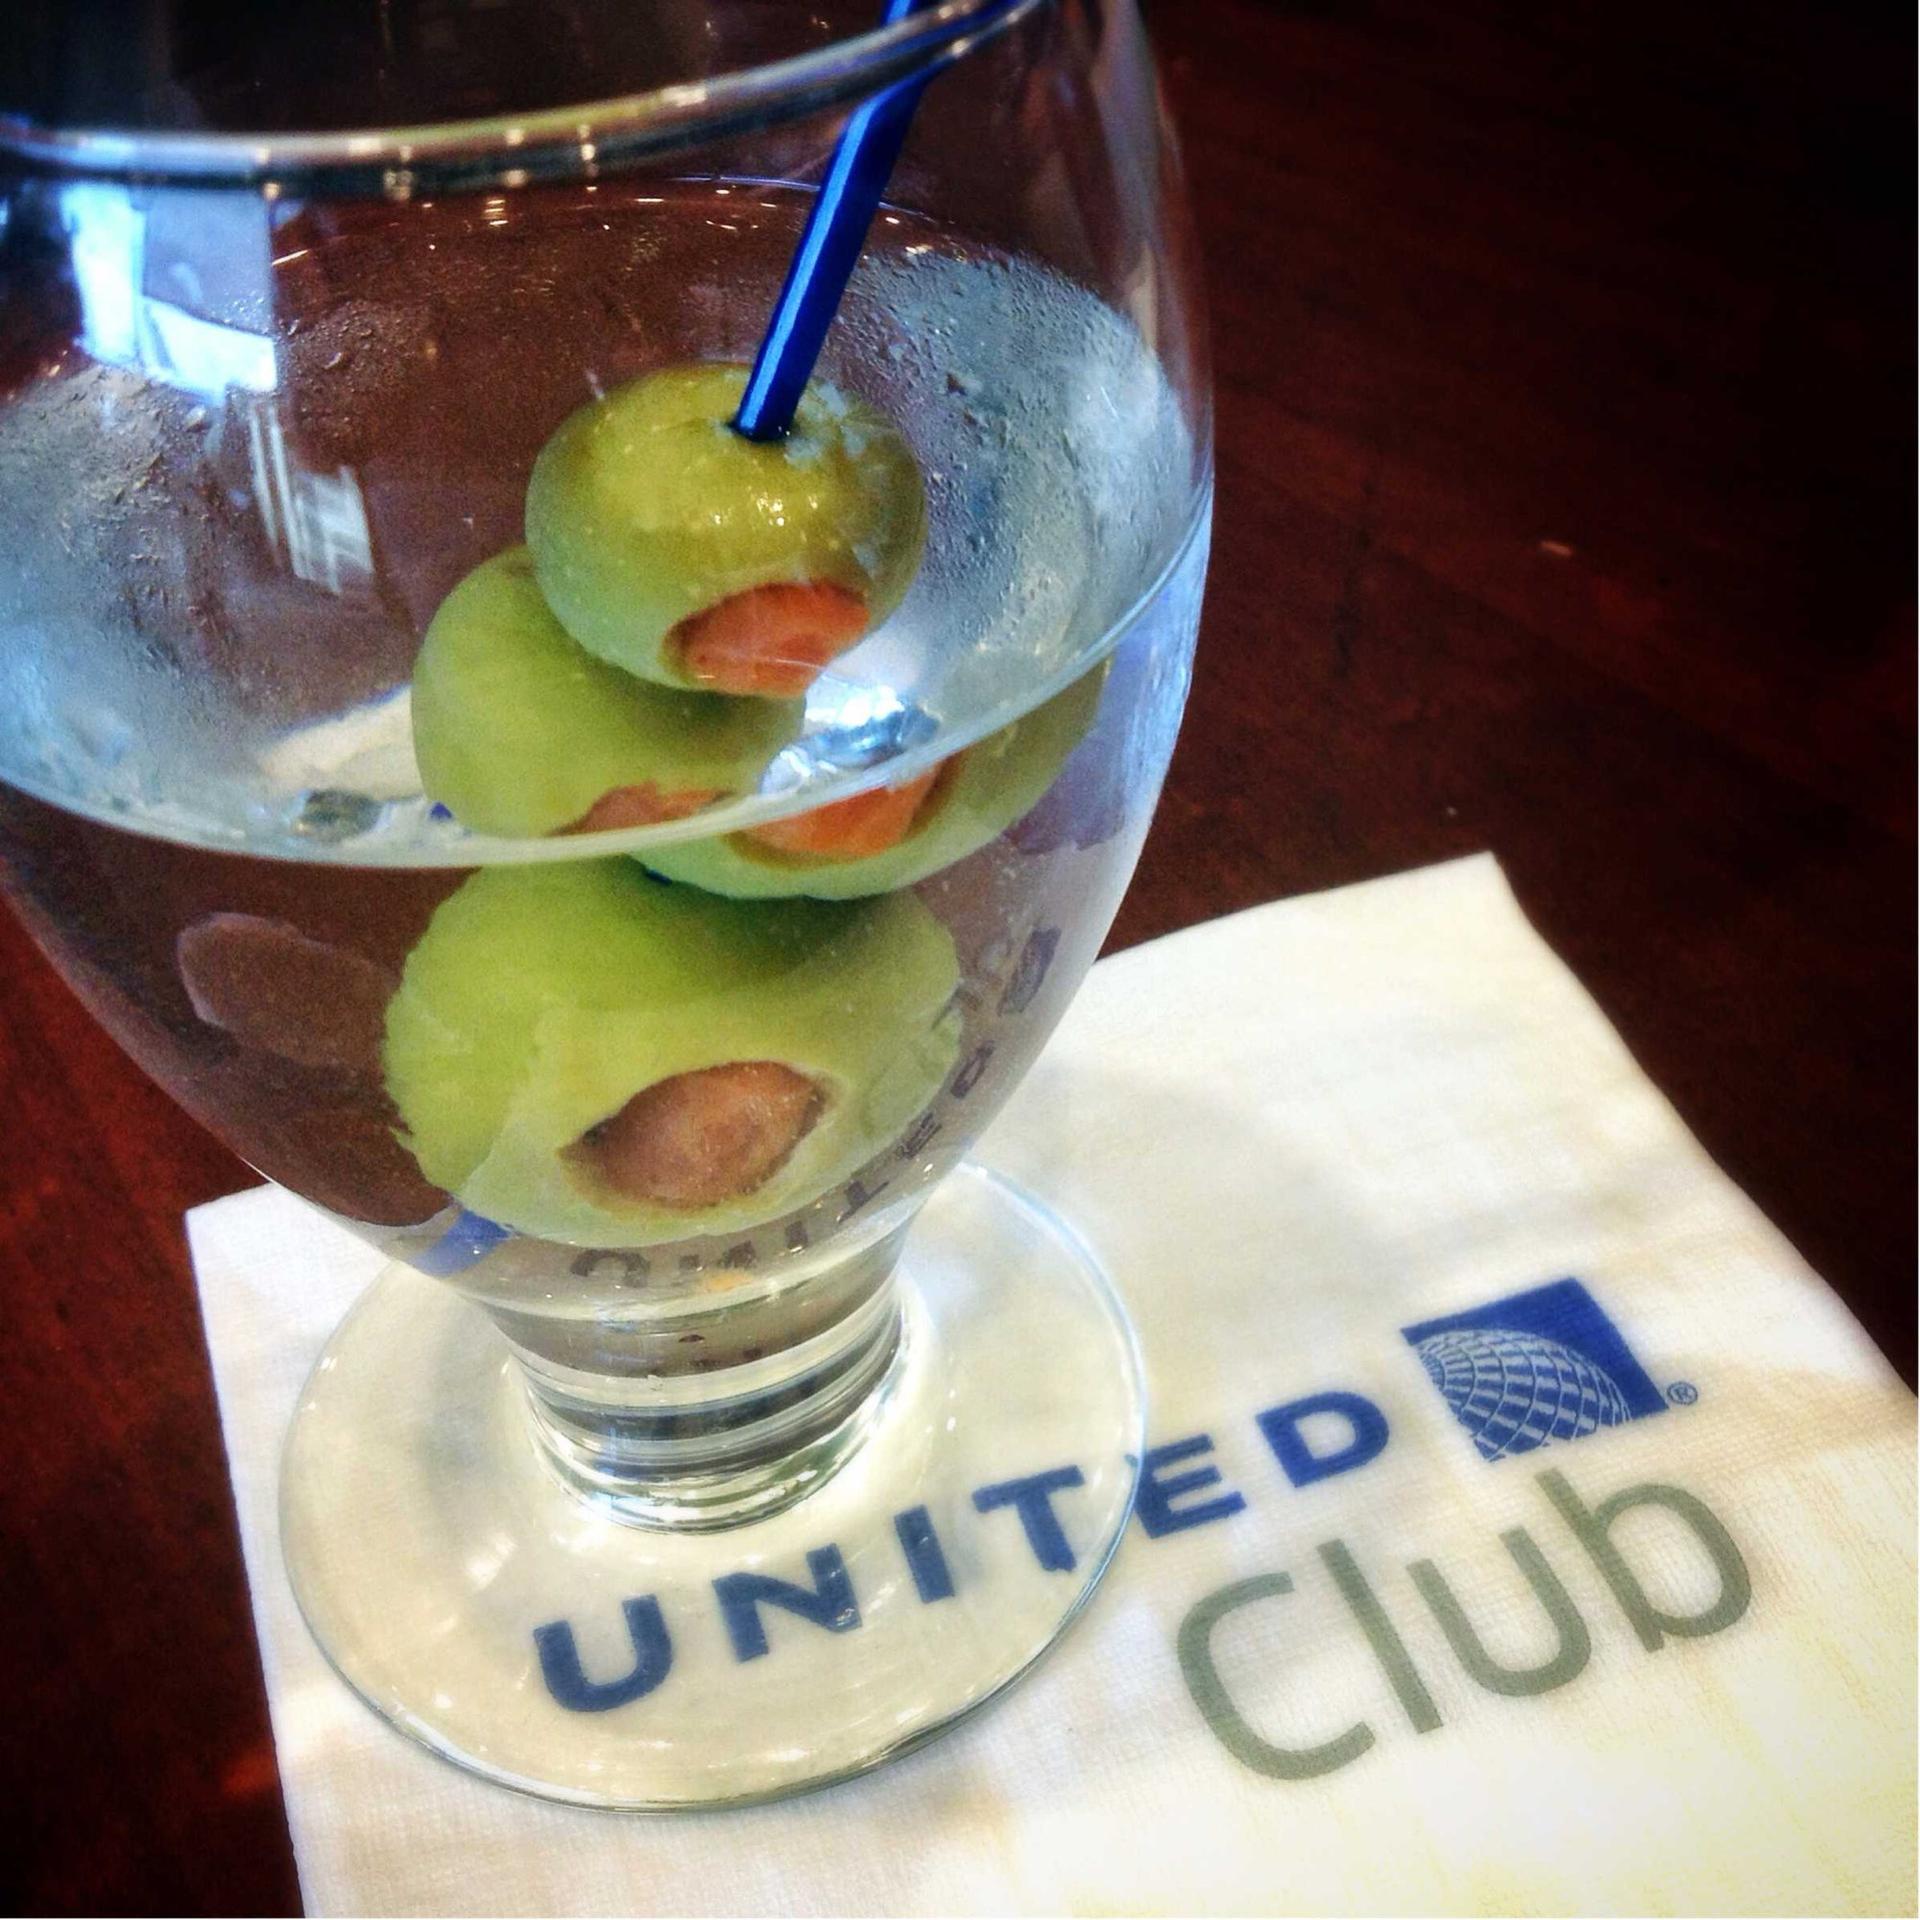 United Airlines United Club image 2 of 4